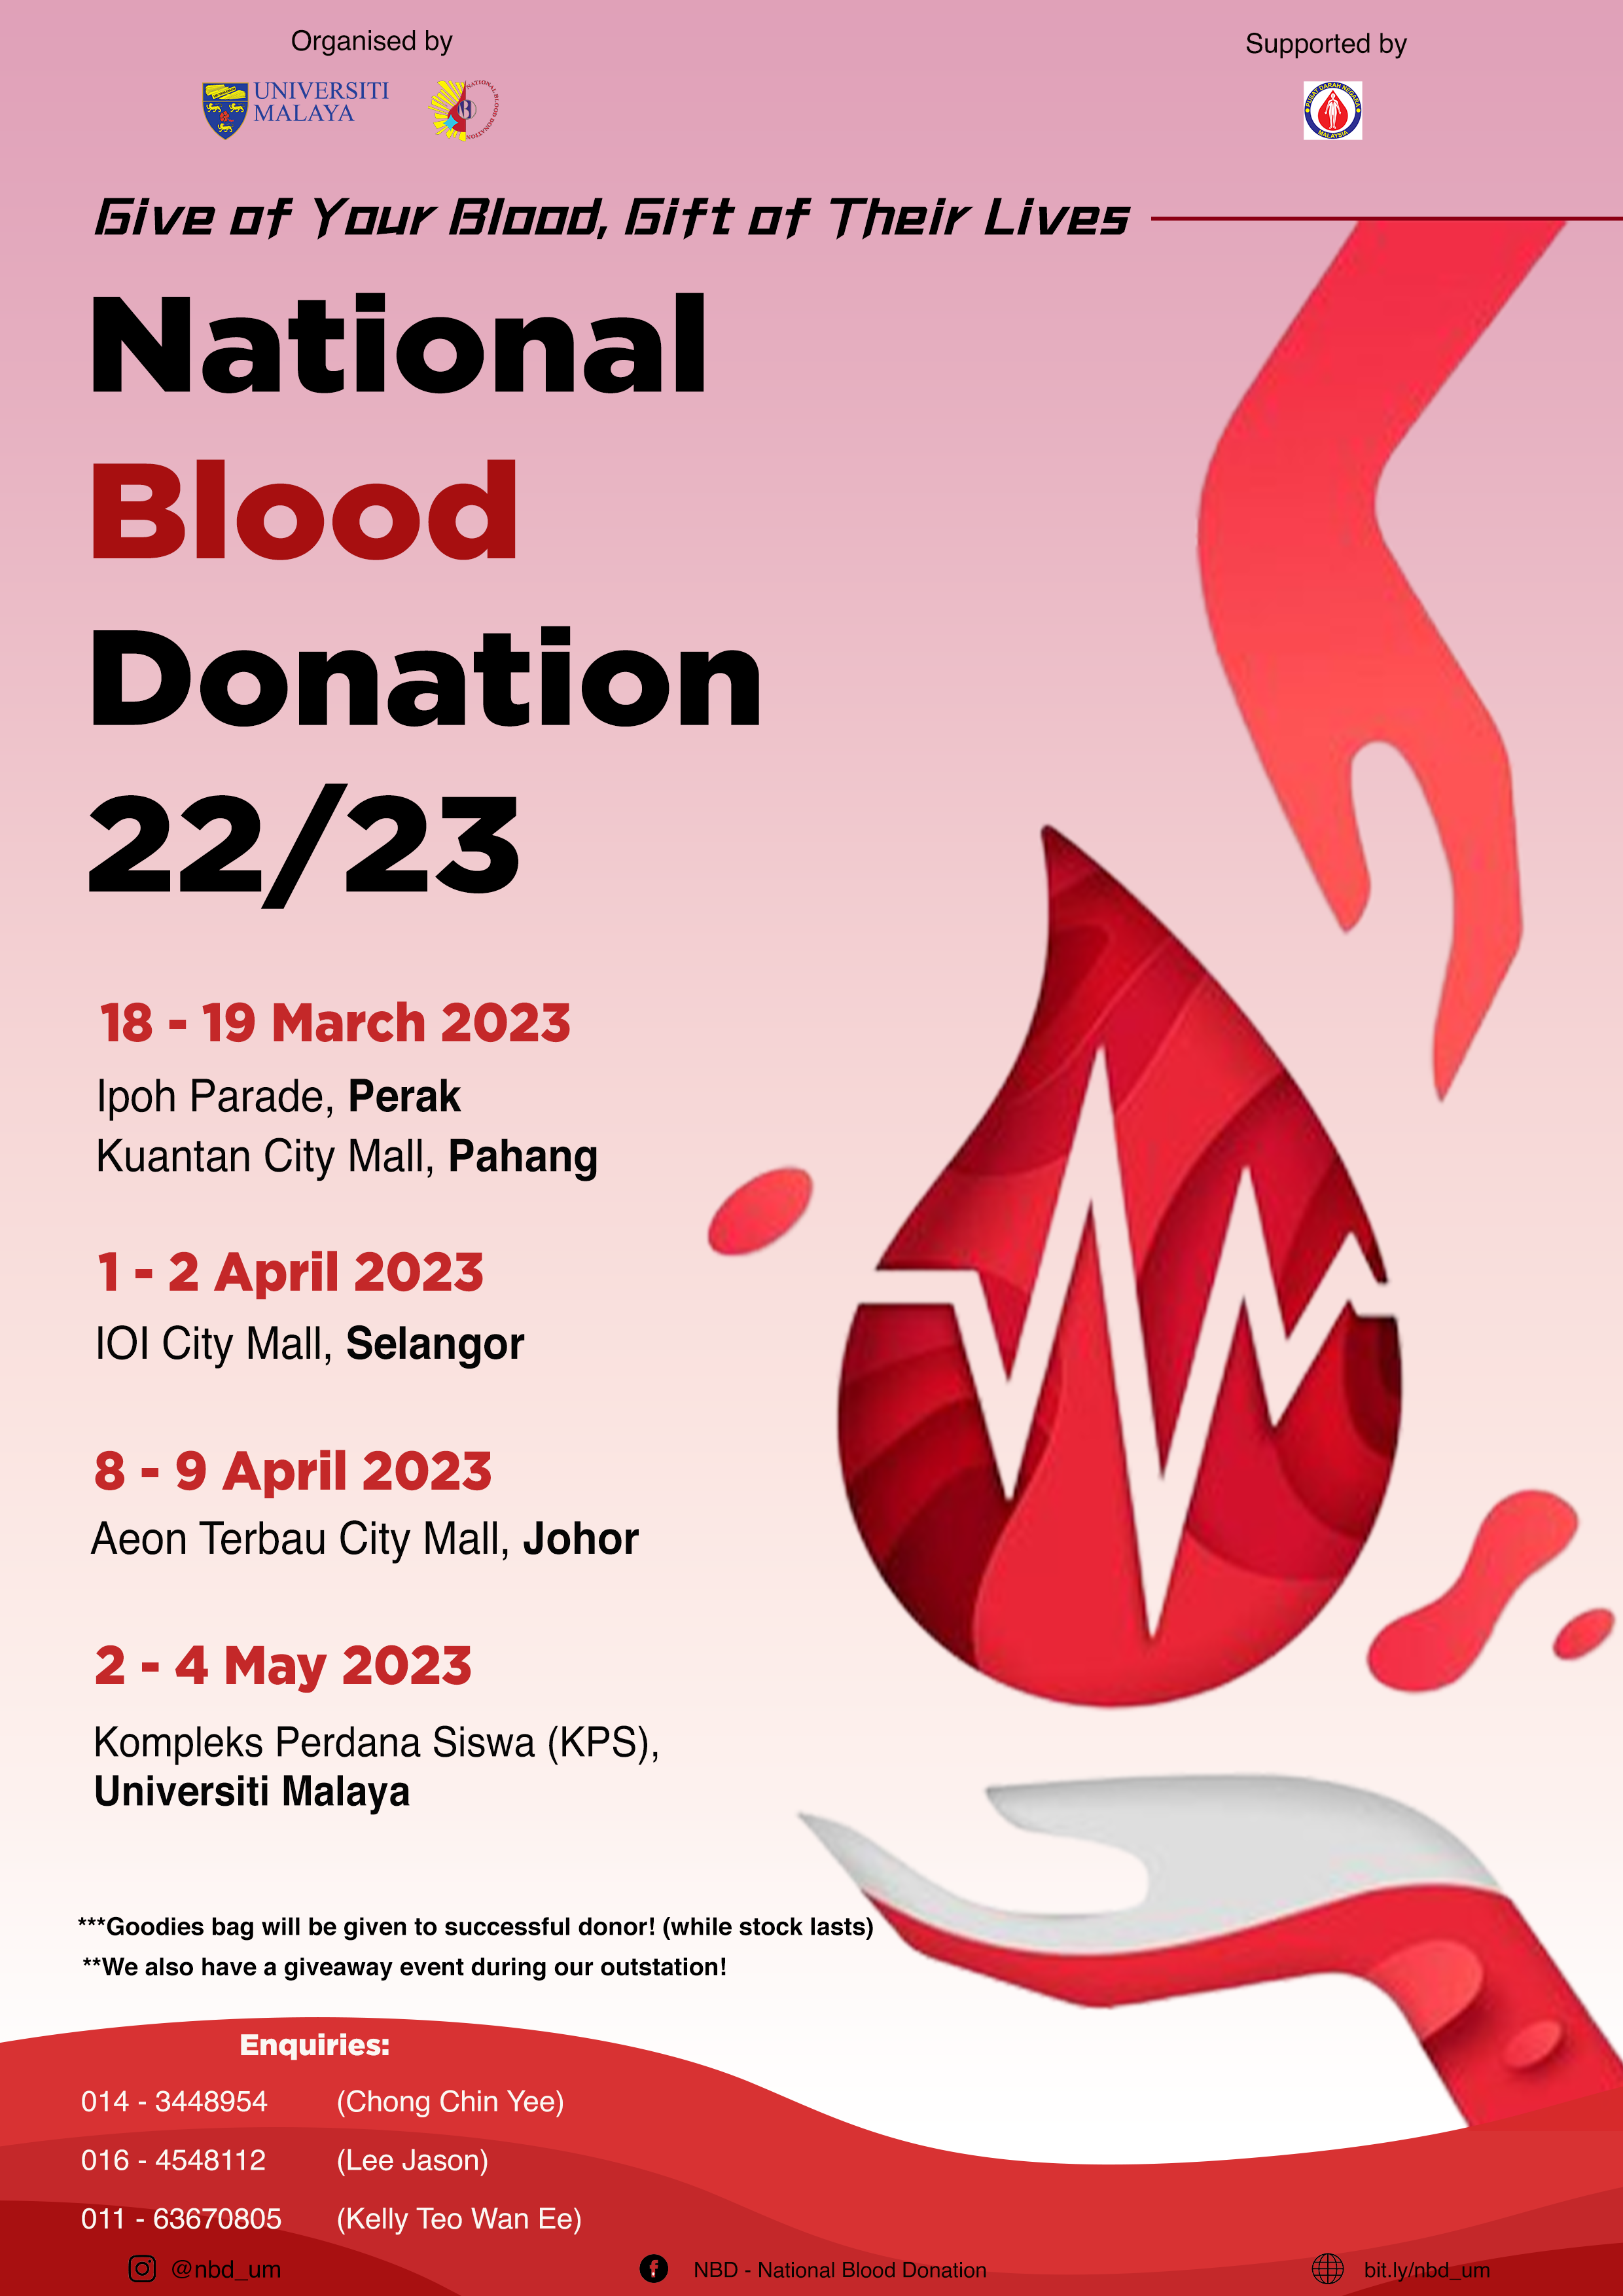 Bad blood: here are 5 types of people who shouldn't donate blood | weirdkaya